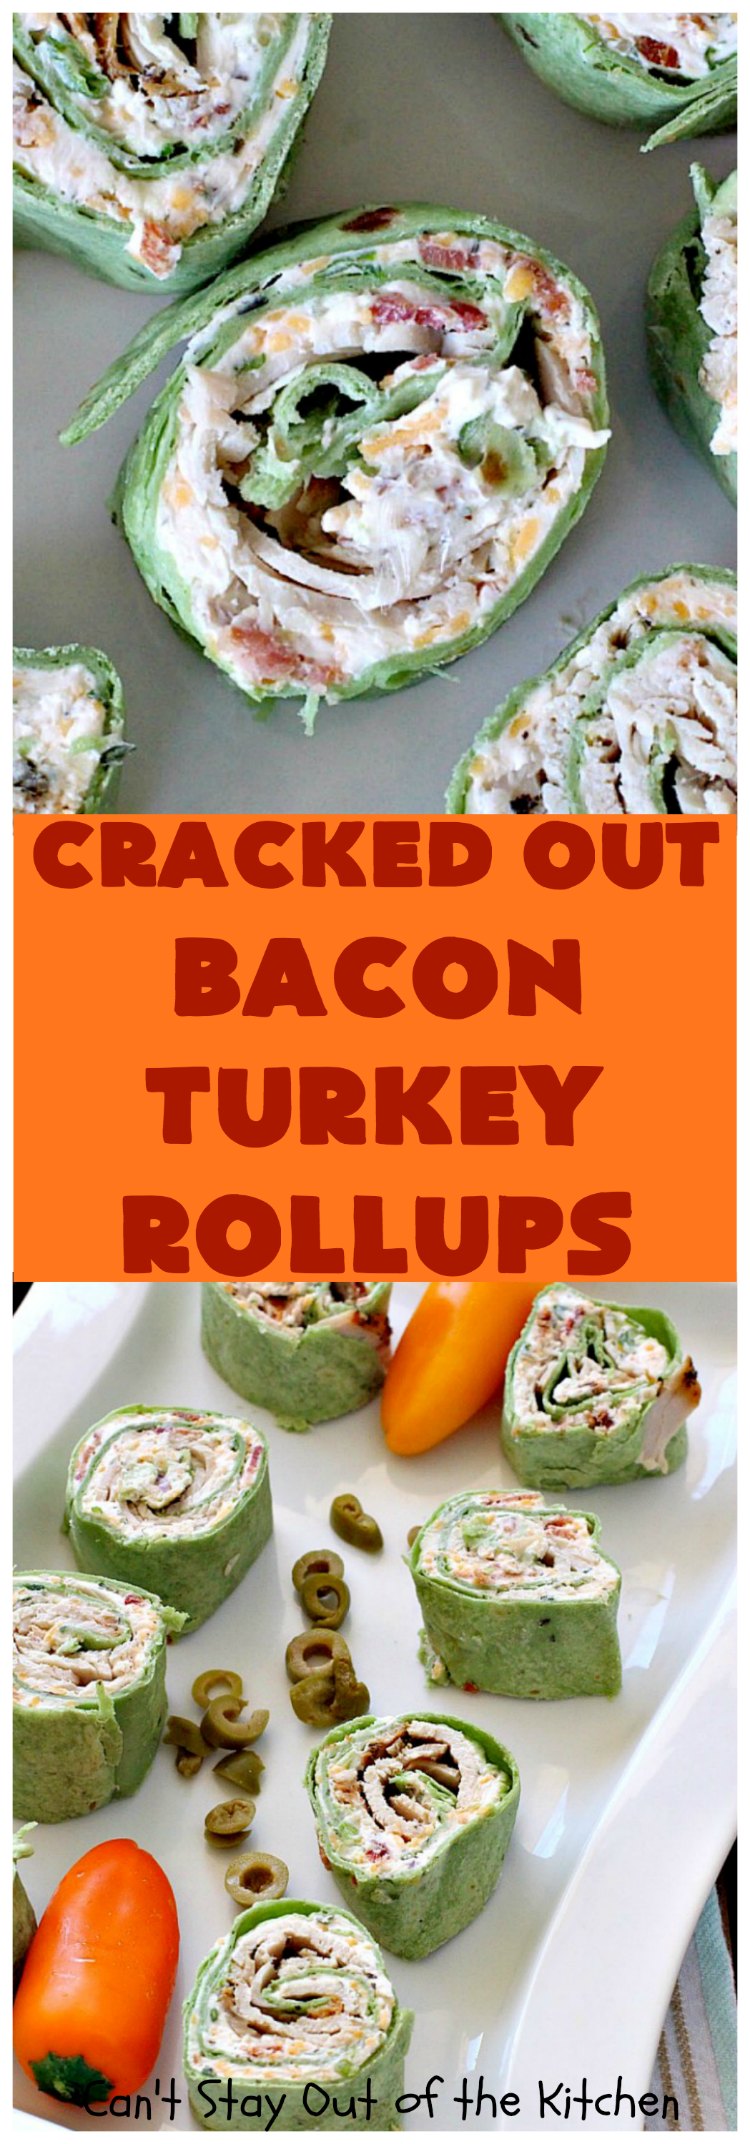 Cracked Out Bacon Turkey Rollups | Can't Stay Out of the Kitchen